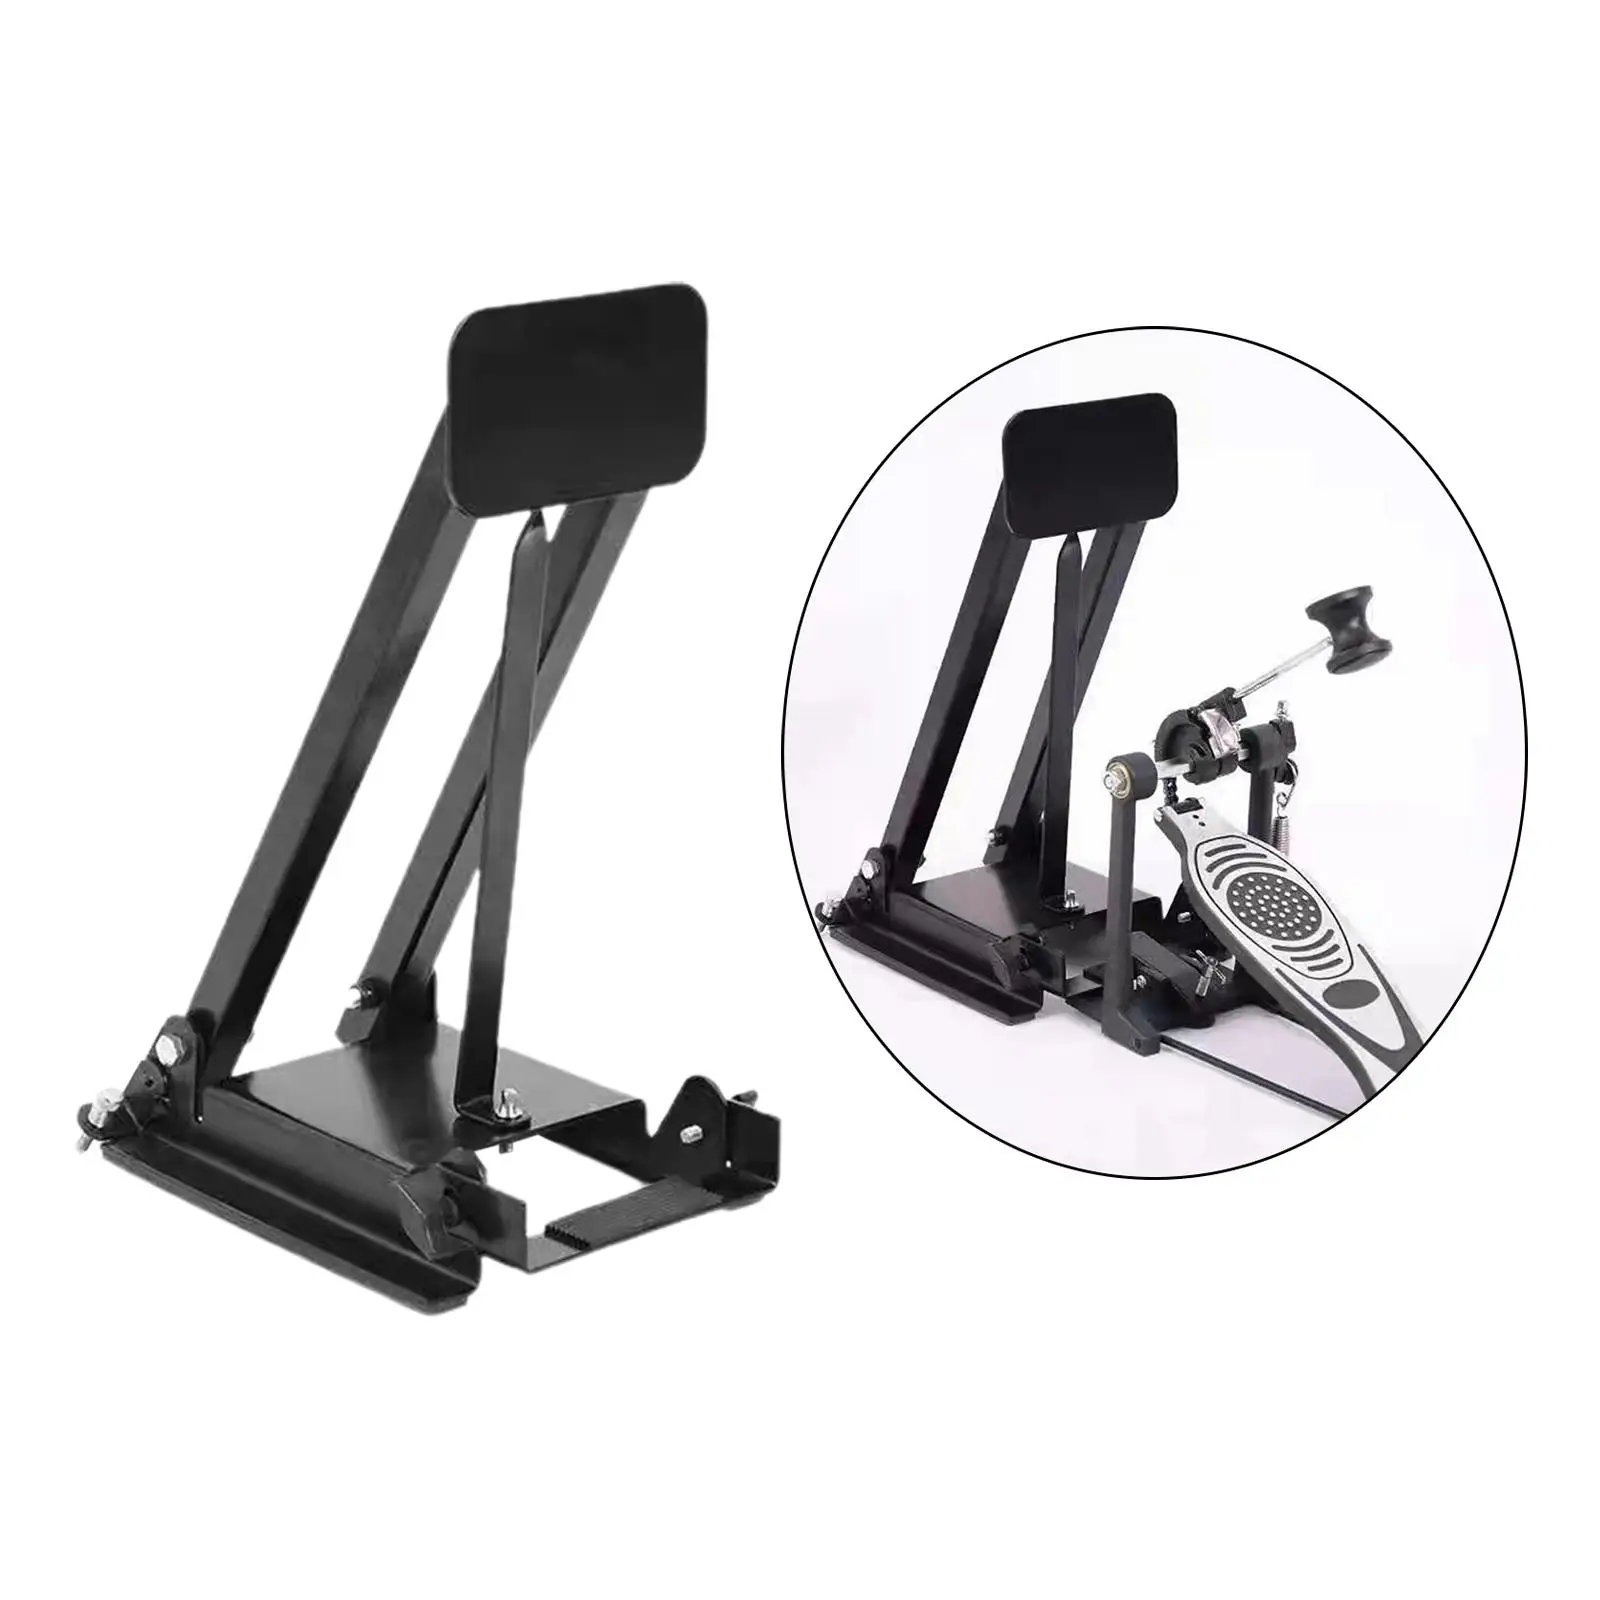 Bass Drum Pedal Durable for Beginner and Pro Drummers Single Foot Pedal Drum Step on Beater for Performance Acoustic Drum Kits